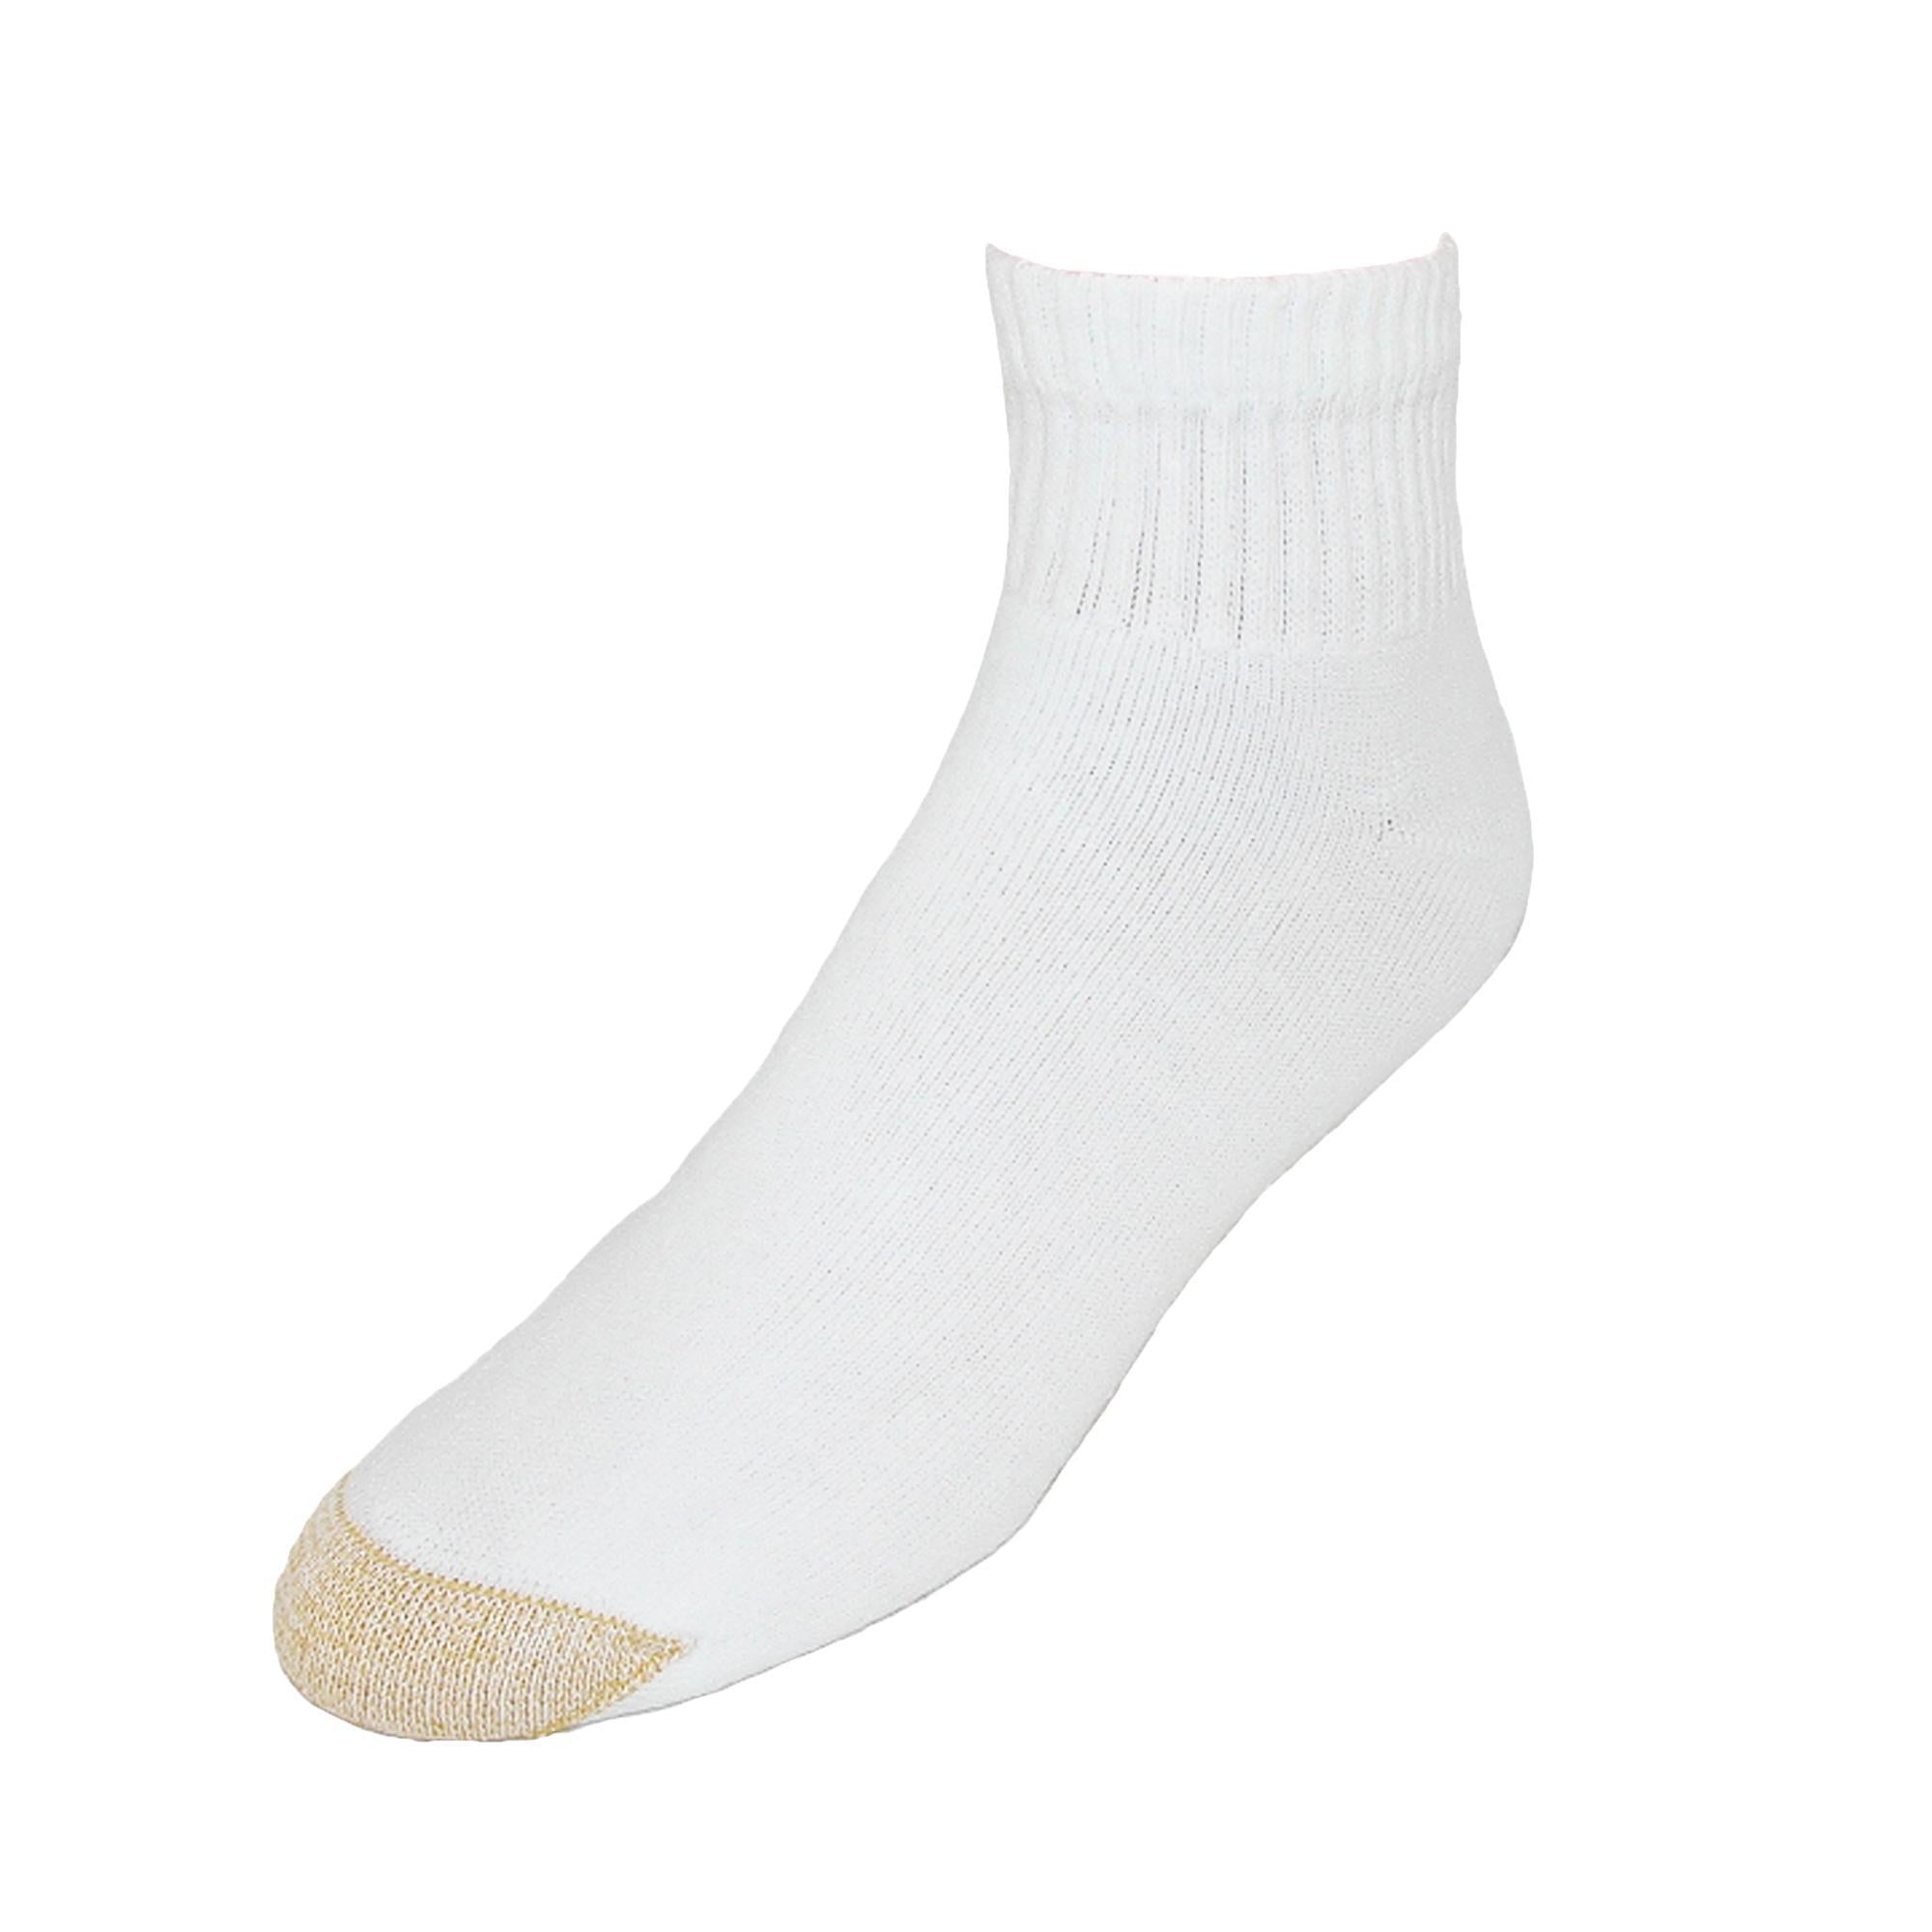 Men's Big & Tall Cotton Quarter Socks (Pack of 6) by Gold Toe | Big and ...